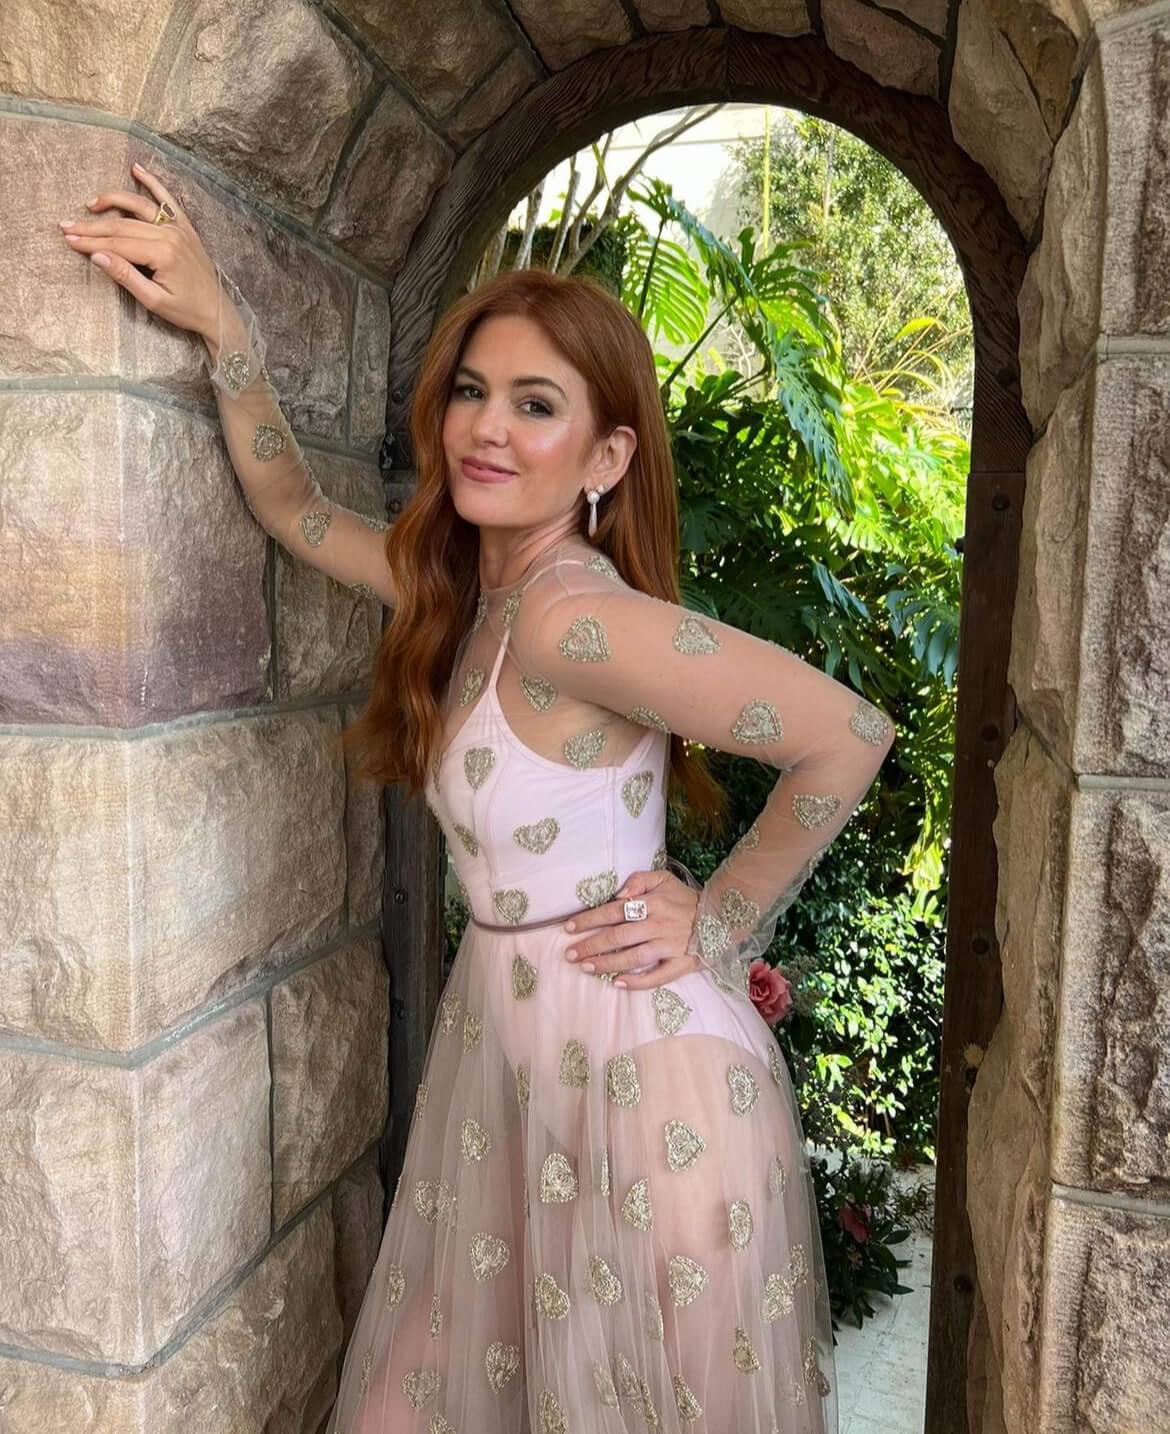 Isla Fisher posing for the camera. This is posted on her Instagram.